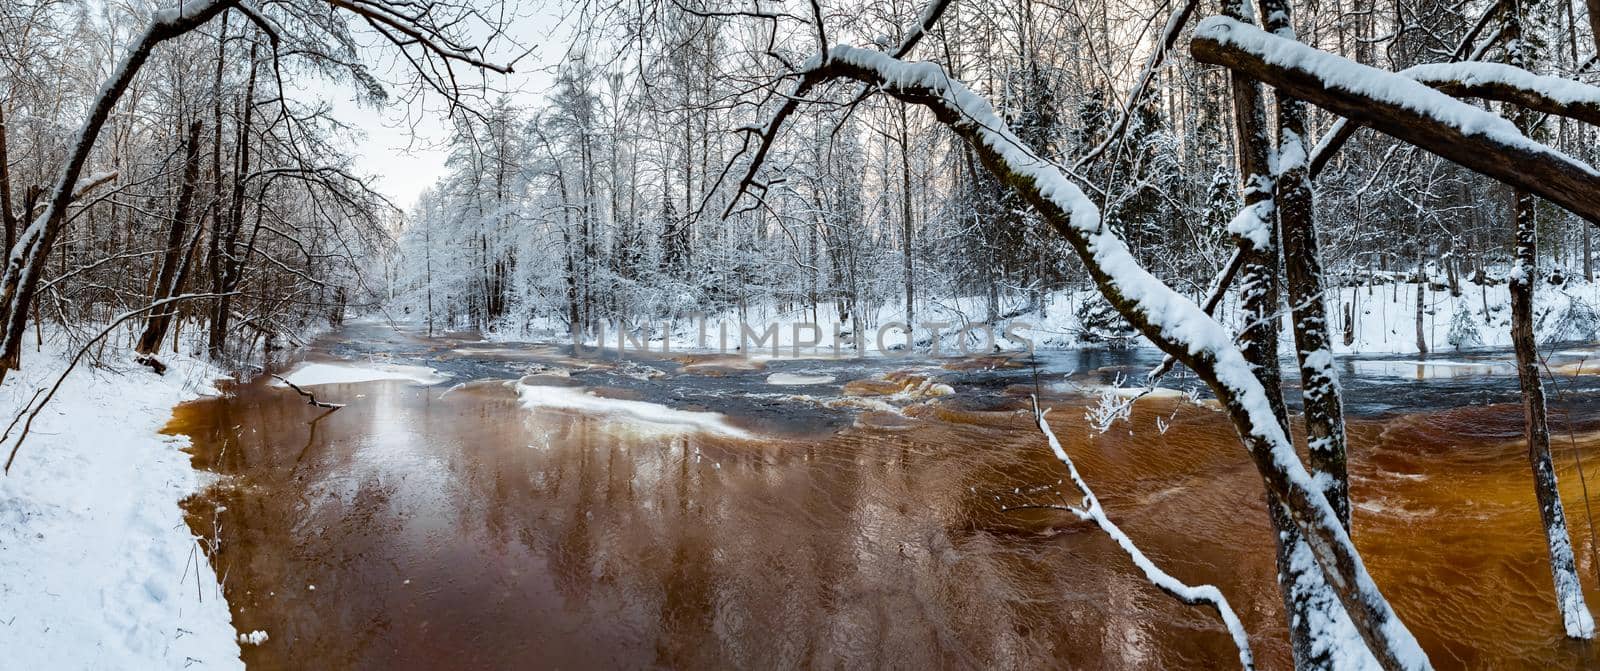 The wild frozen small river in the winter wood, the wild nature at sunset, the river of red color, ice, snow-covered trees by vladimirdrozdin